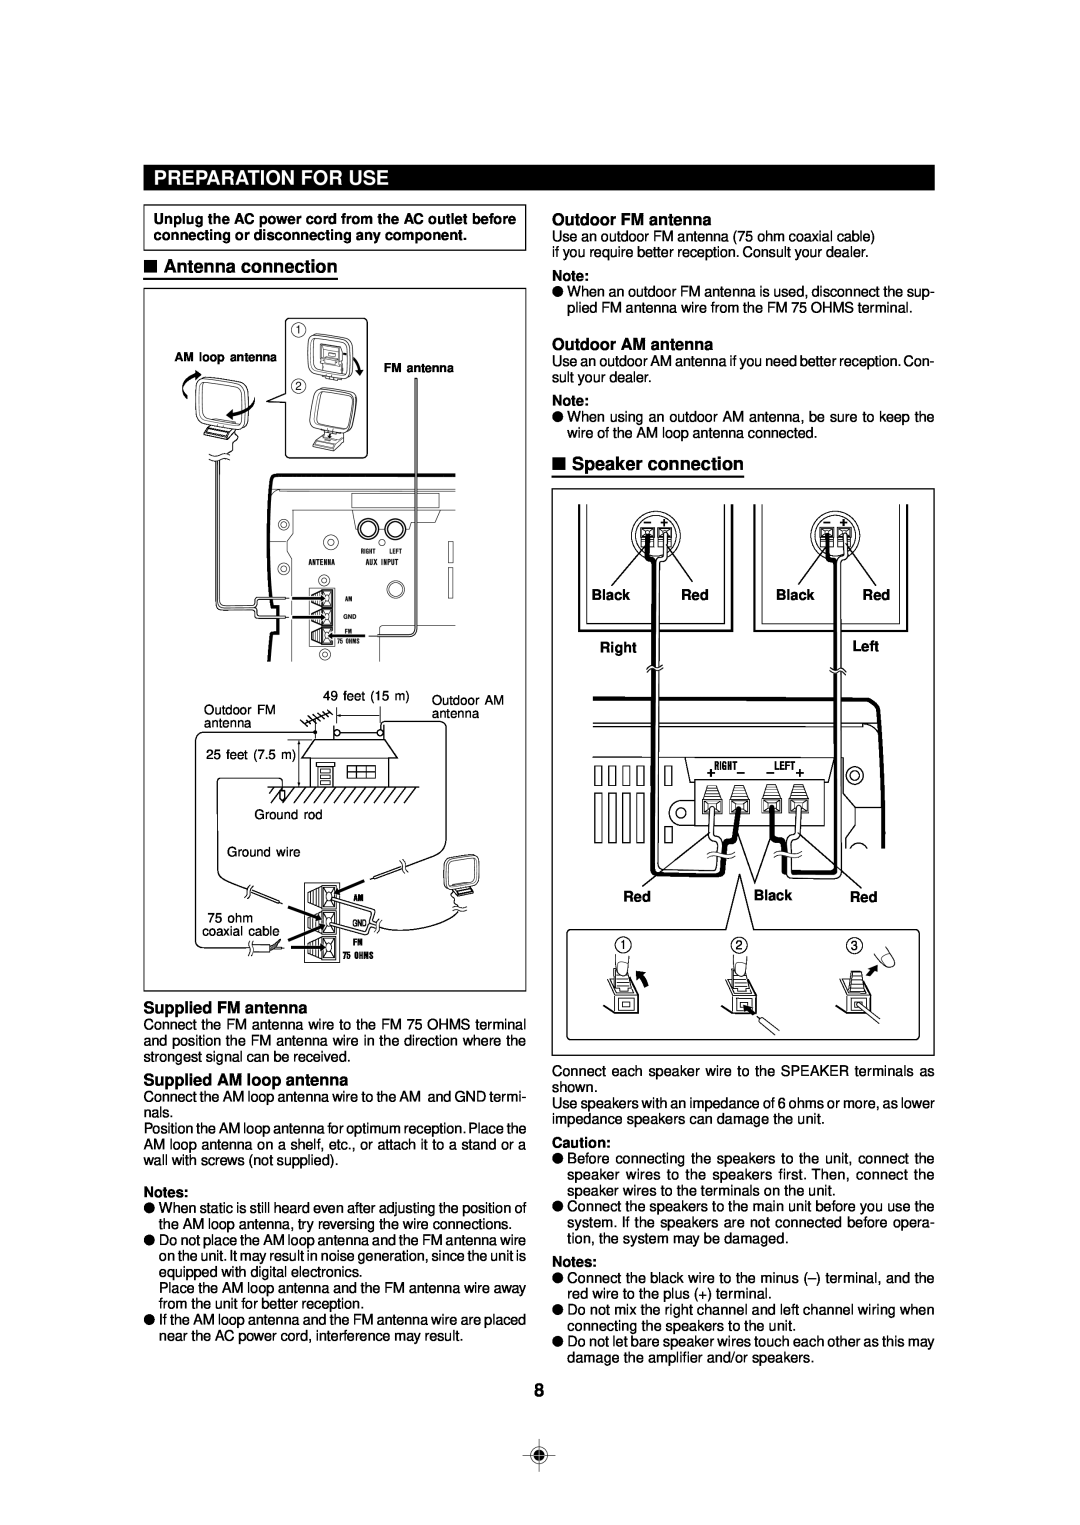 Sharp MD-MX30 operation manual Preparation For Use, Antenna connection, Speaker connection 